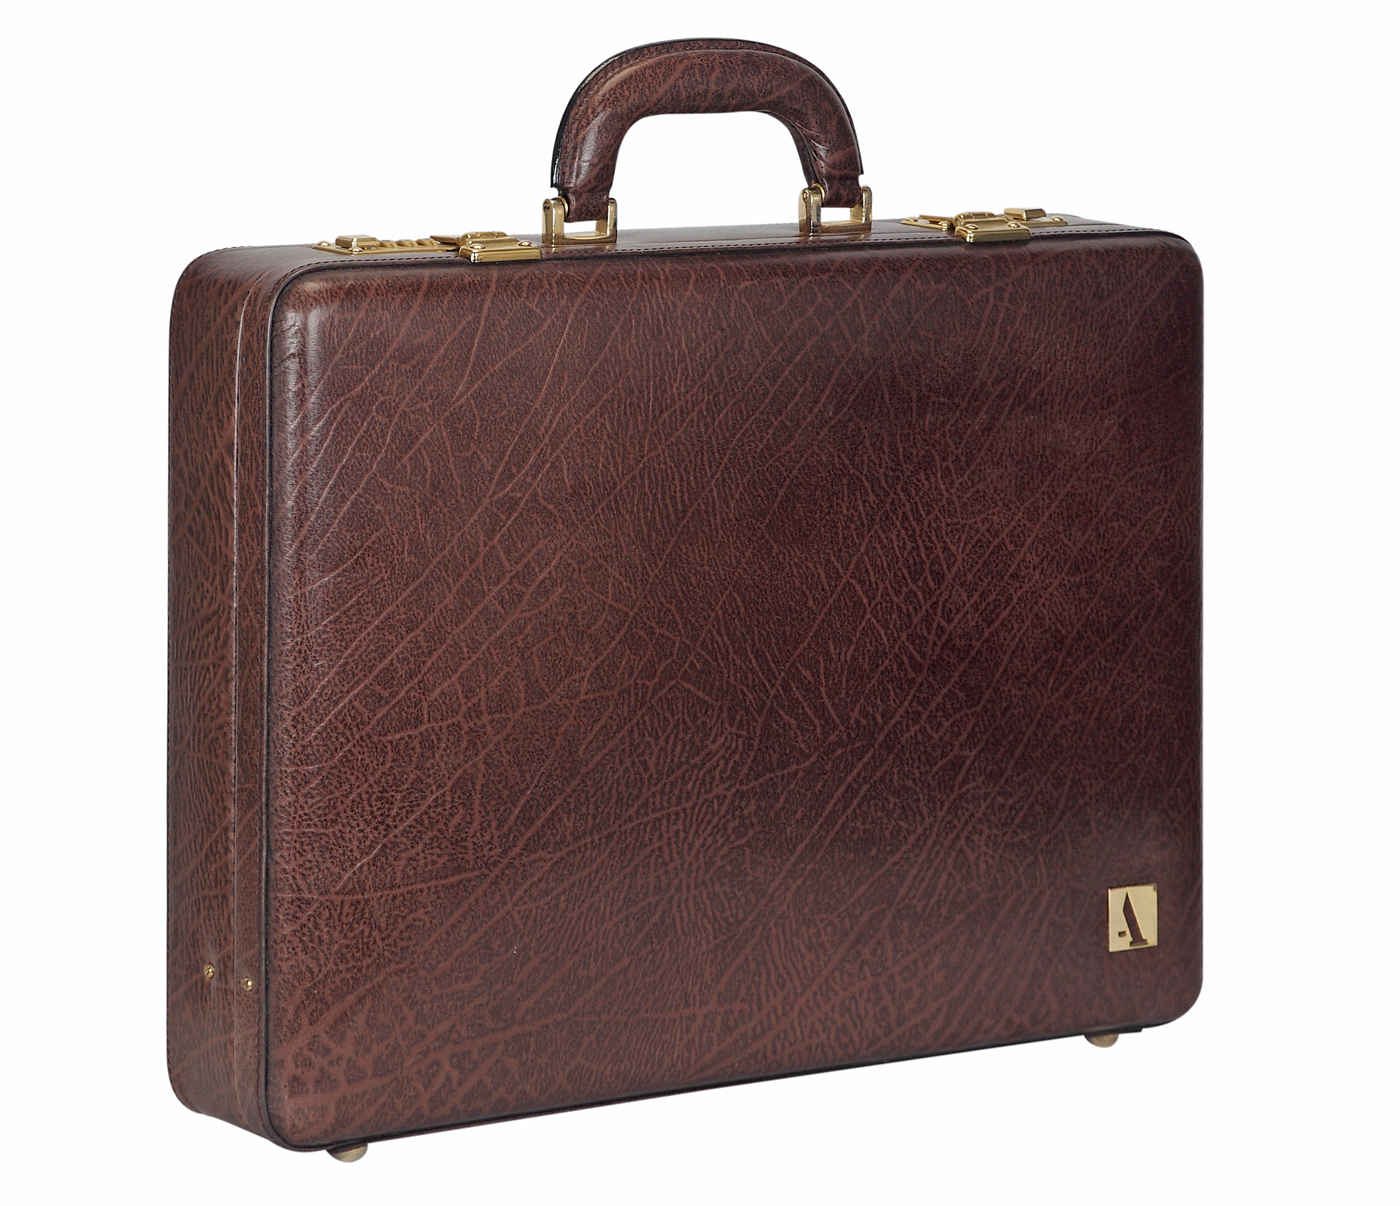 BC14--Briefcase hard top in Genuine Leather - Brown